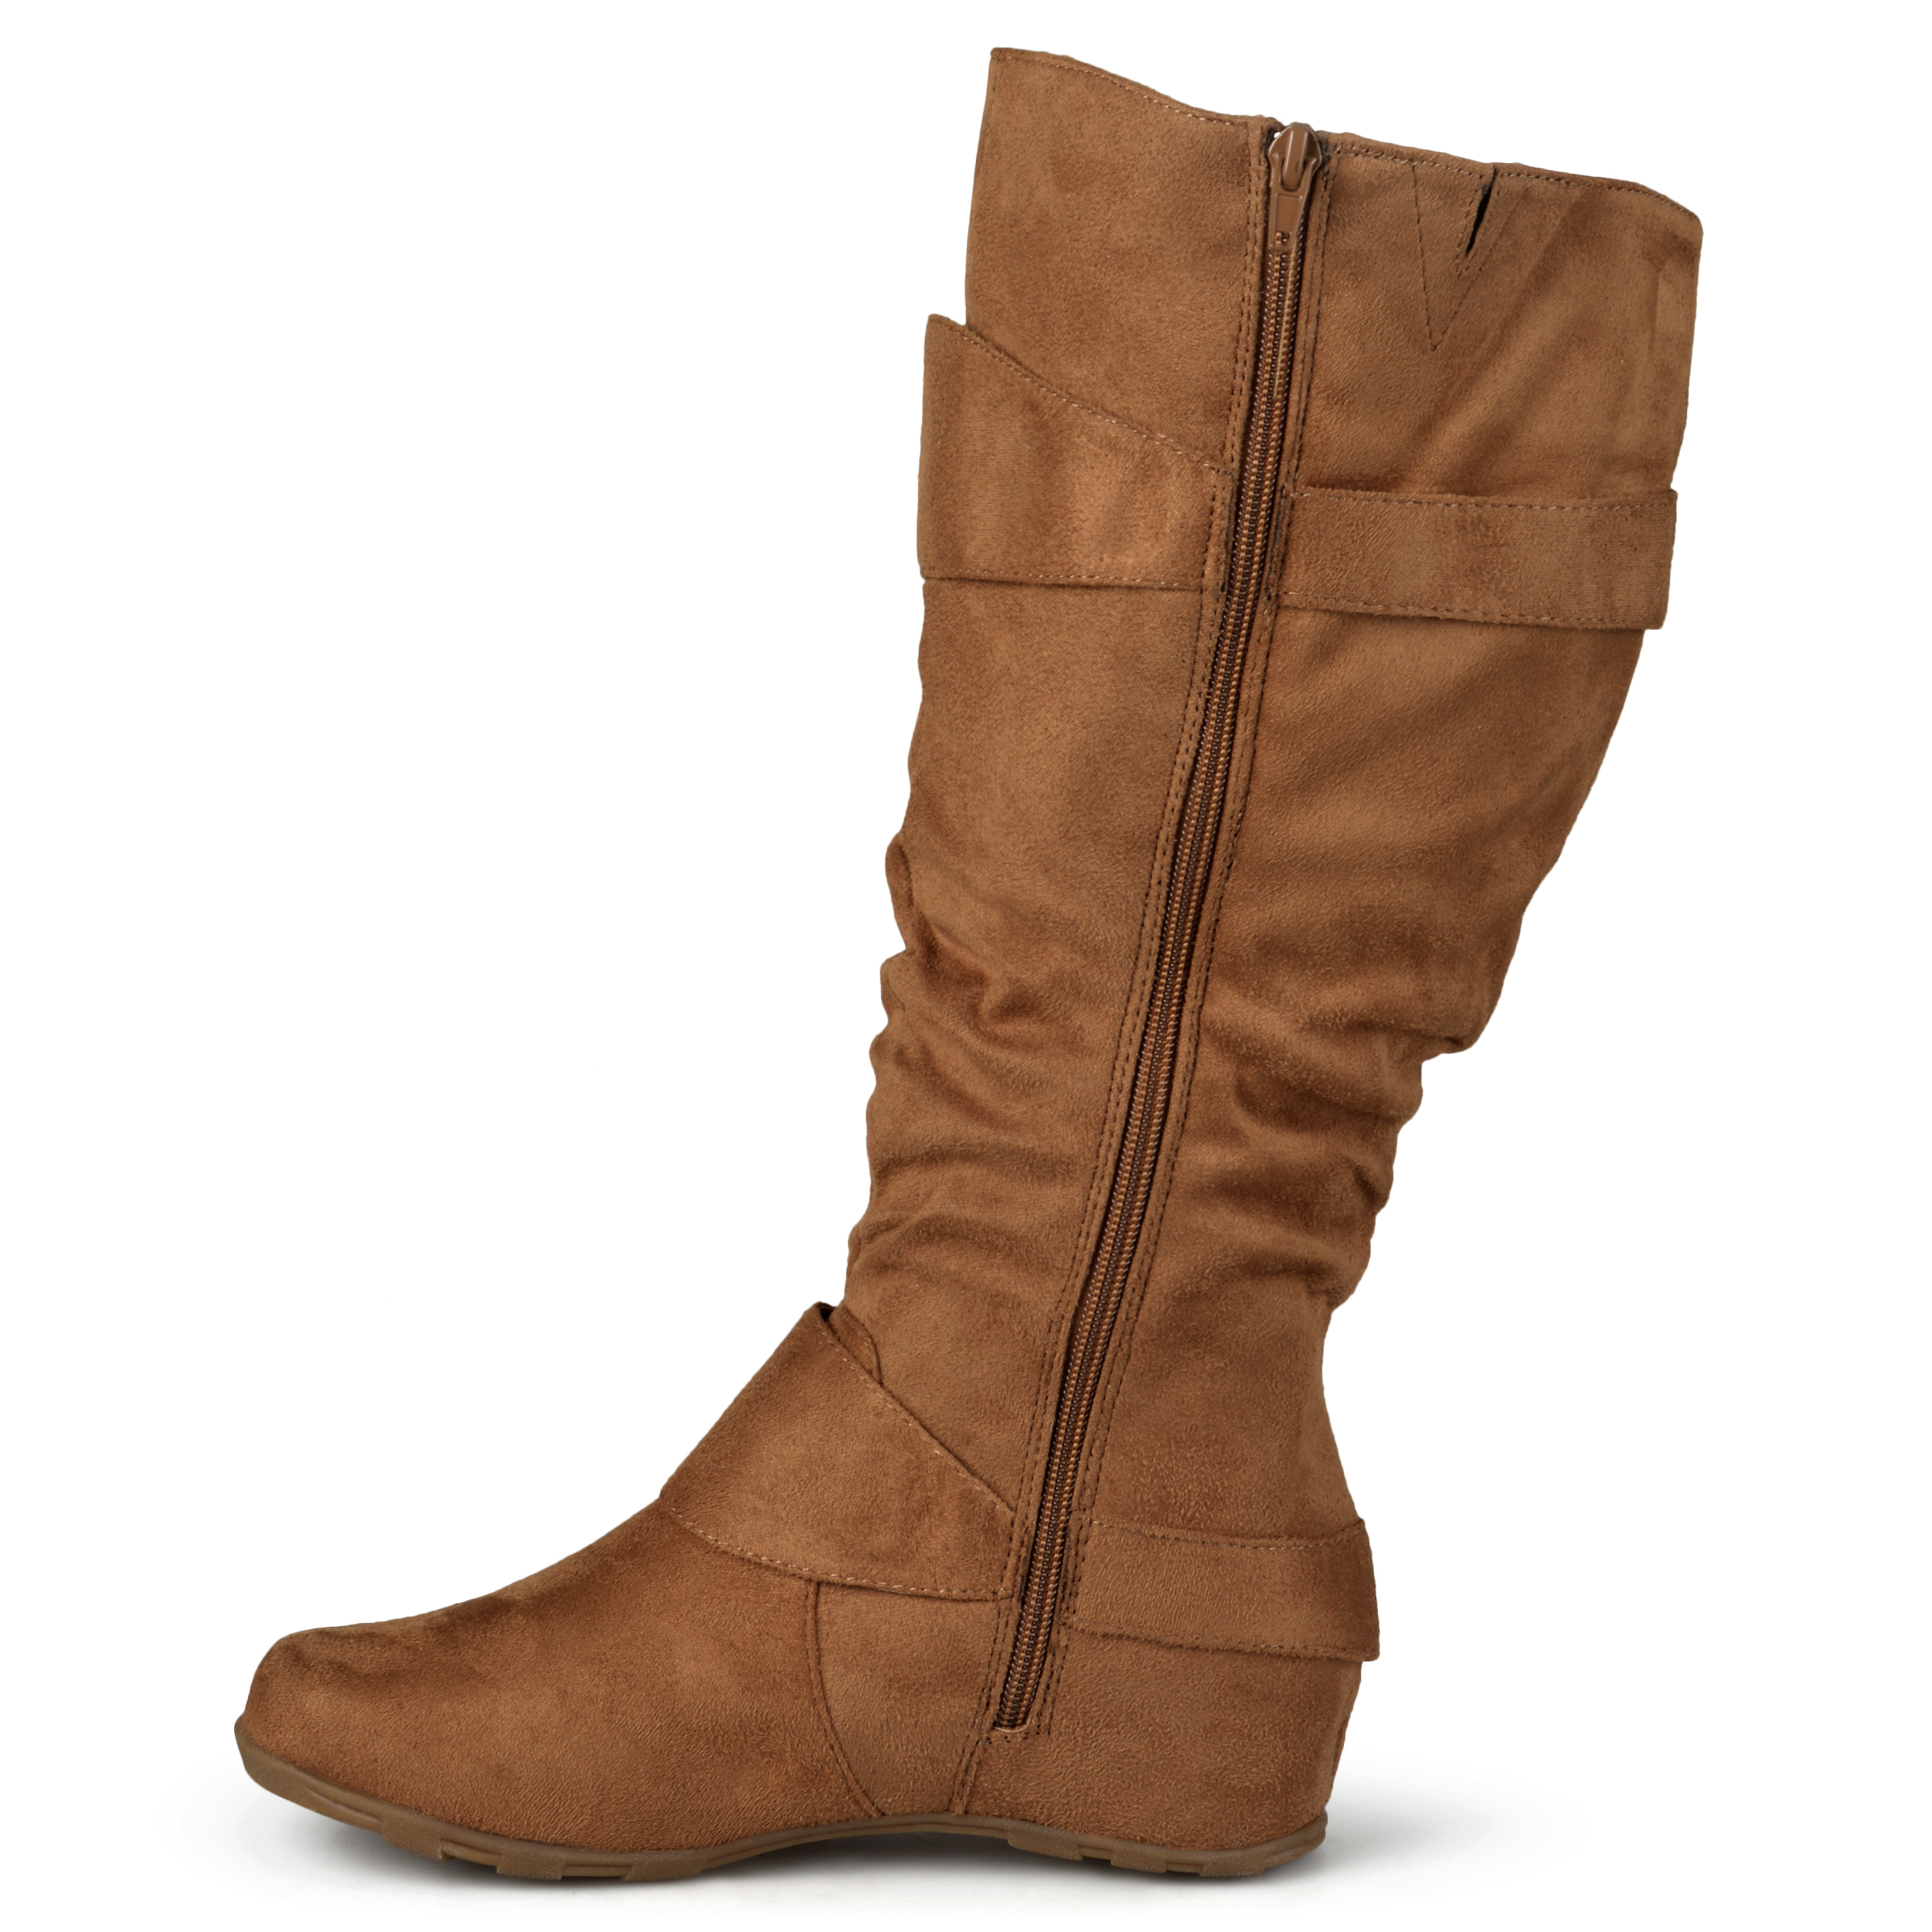 Women's August Slouchy Wide Calf Boots - image 3 of 8